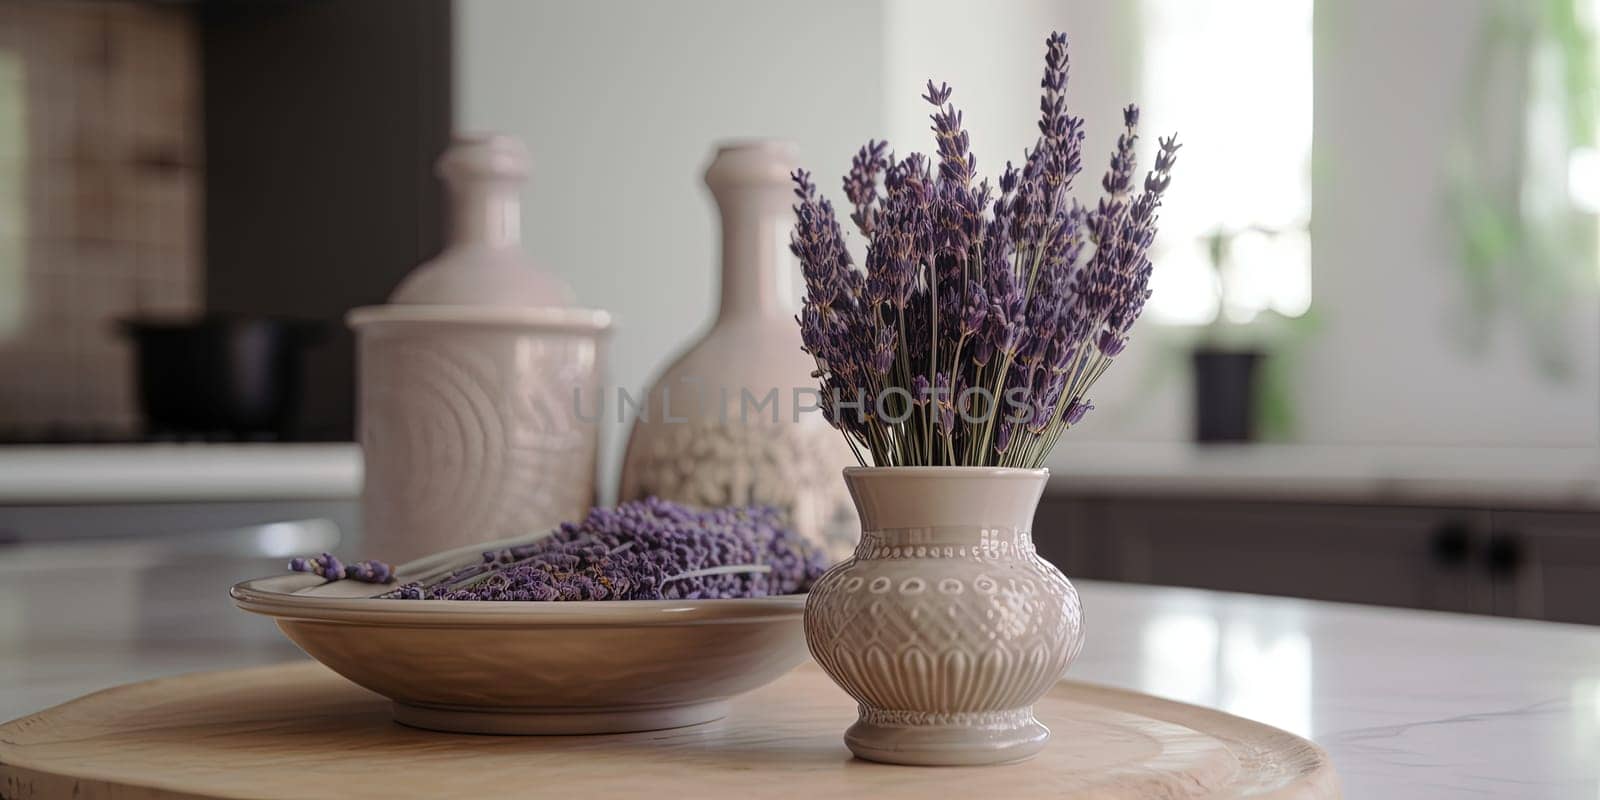 Nice Lavender Bouquet In Vase On A Kitchen Table by tan4ikk1